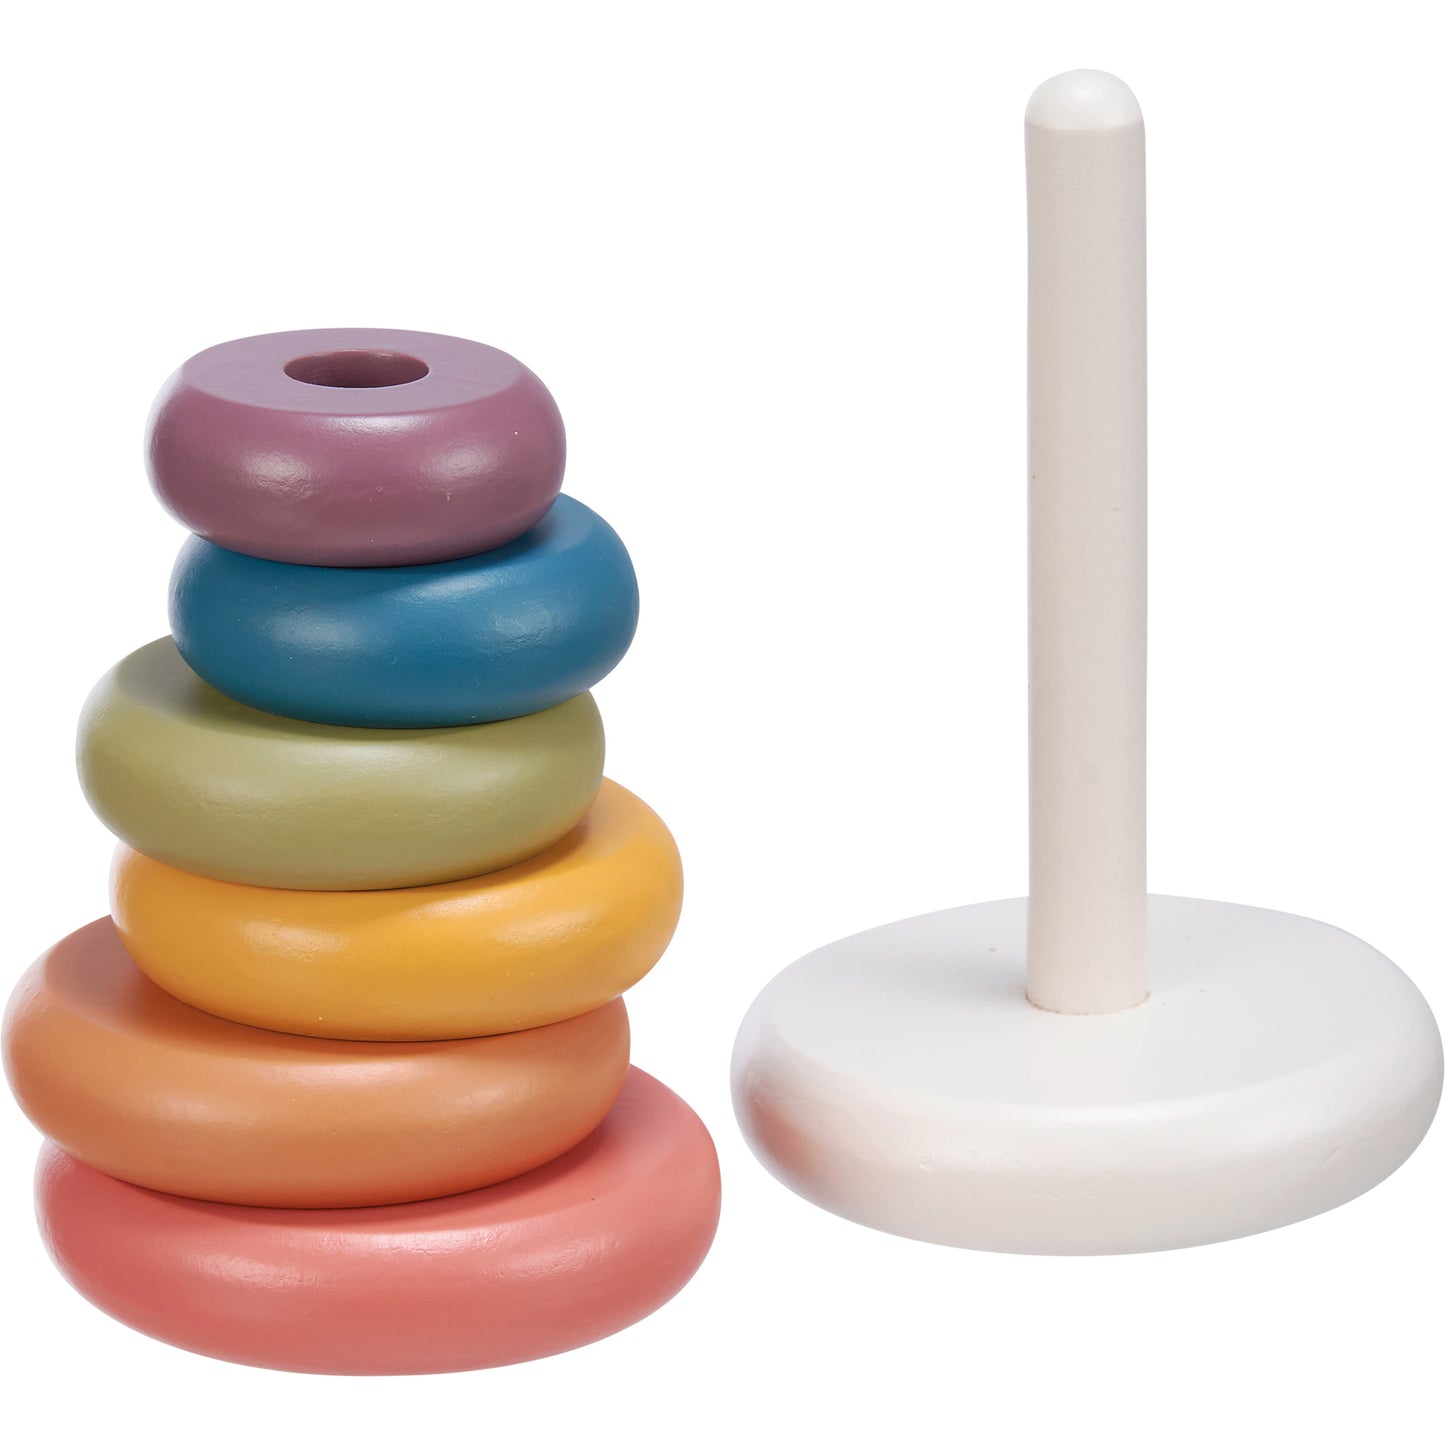 Rainbow Rings Stacking Toy